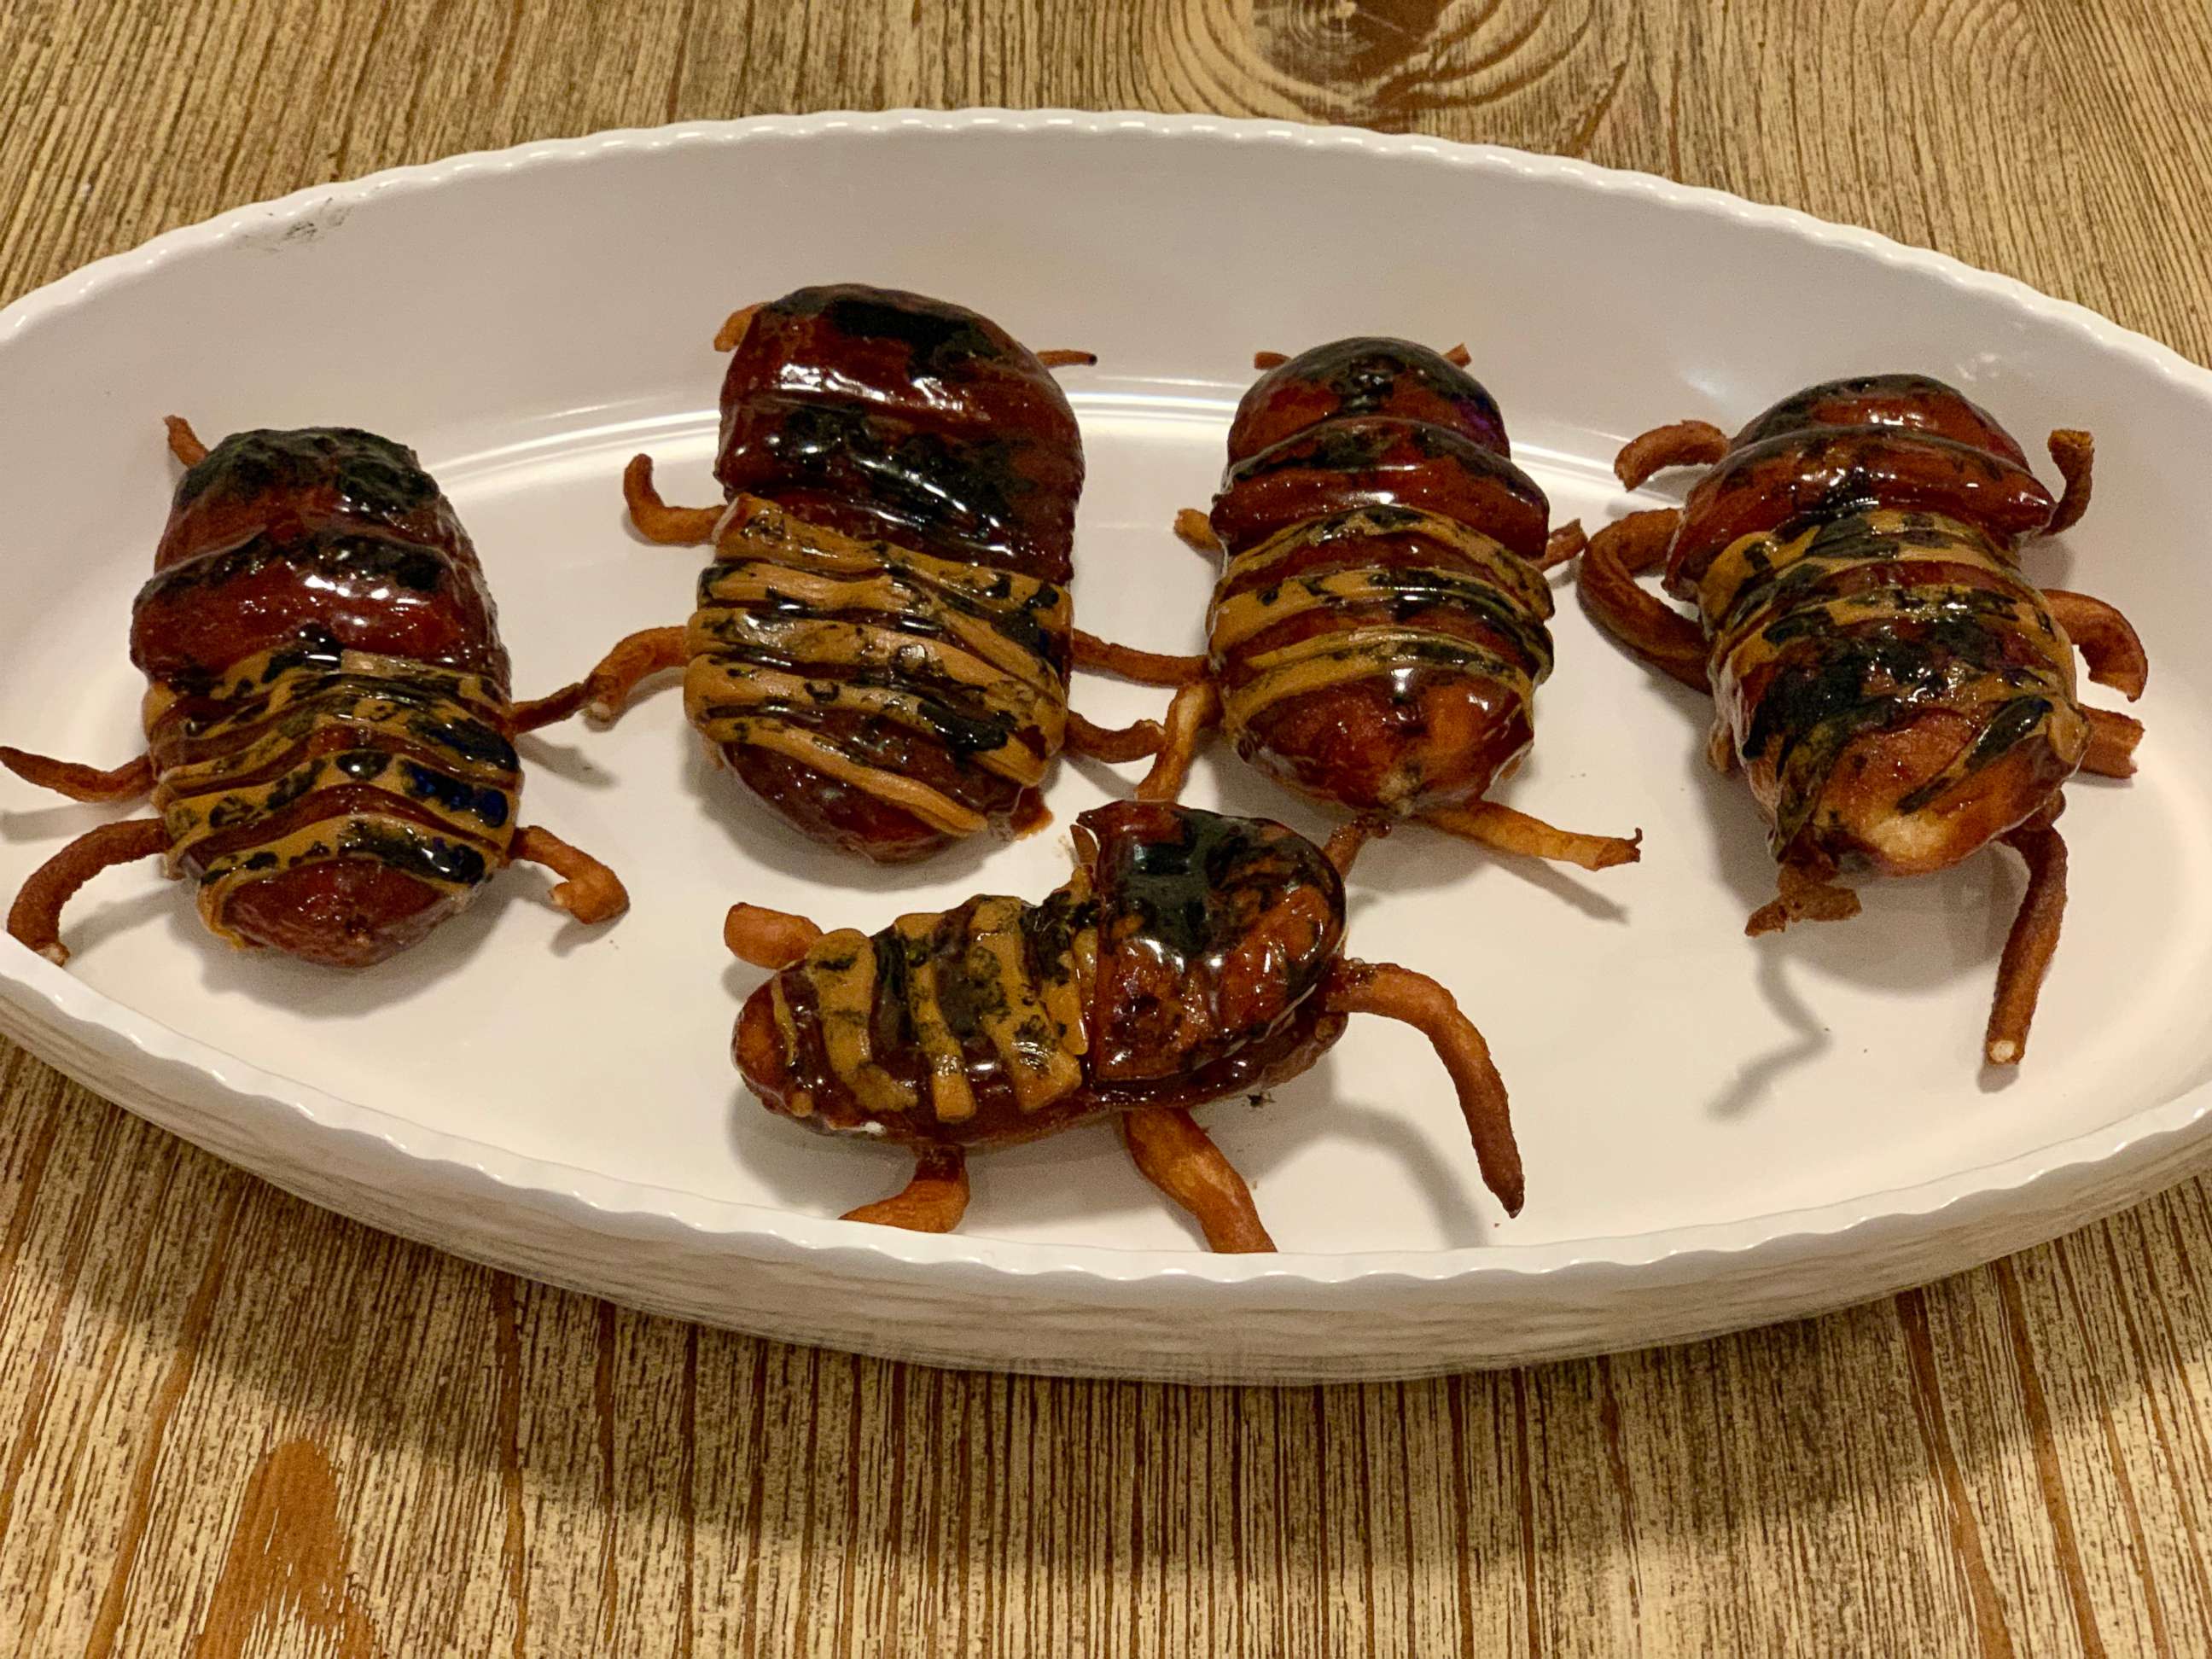 PHOTO: I made Pinterest's top 10 Halloween recipes of 2019, which included Boston cream donuts that look like cockroaches.
